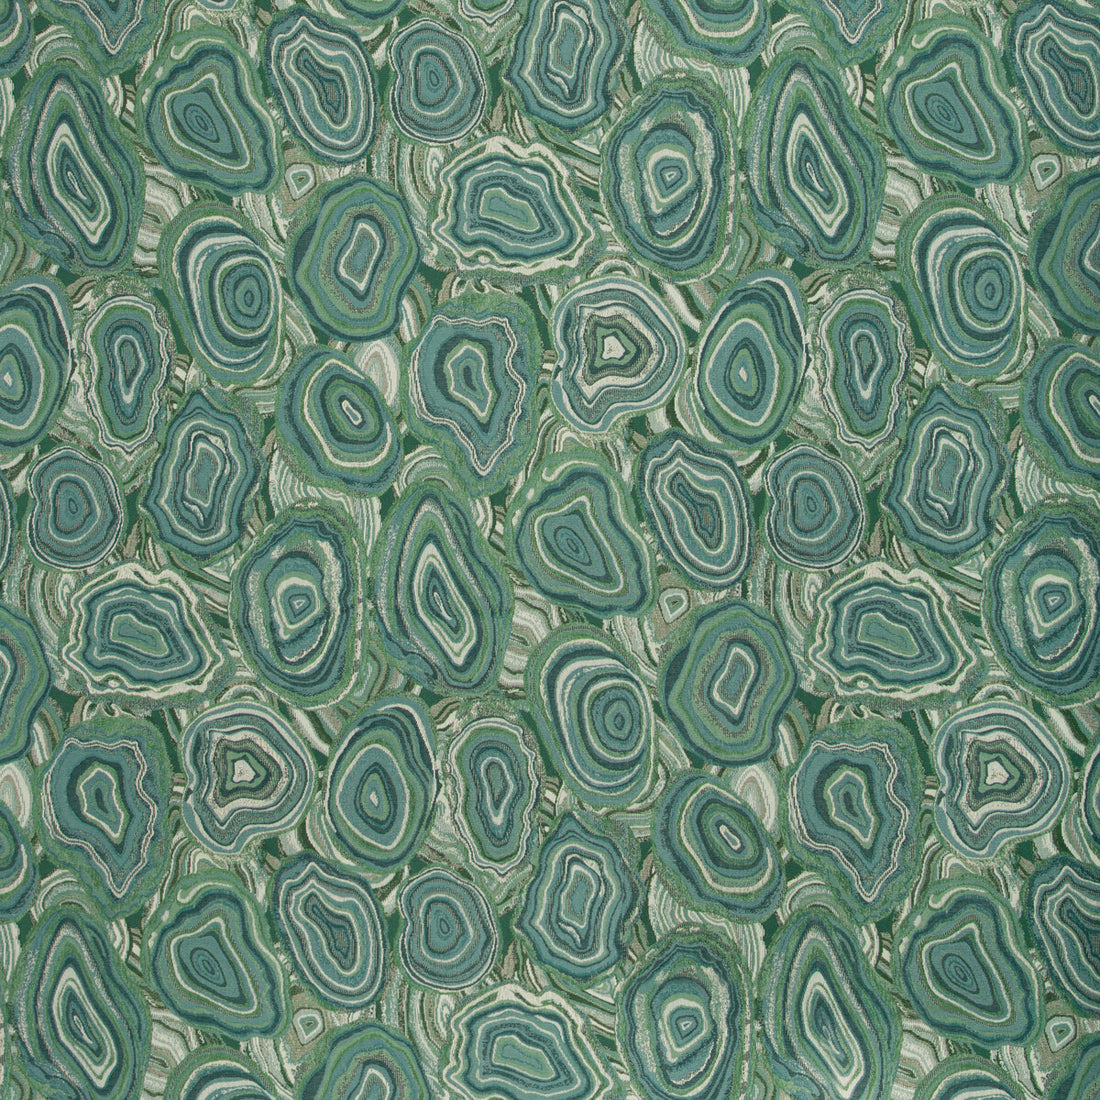 Kravet Design fabric in 34707-30 color - pattern 34707.30.0 - by Kravet Design in the Crypton Home collection